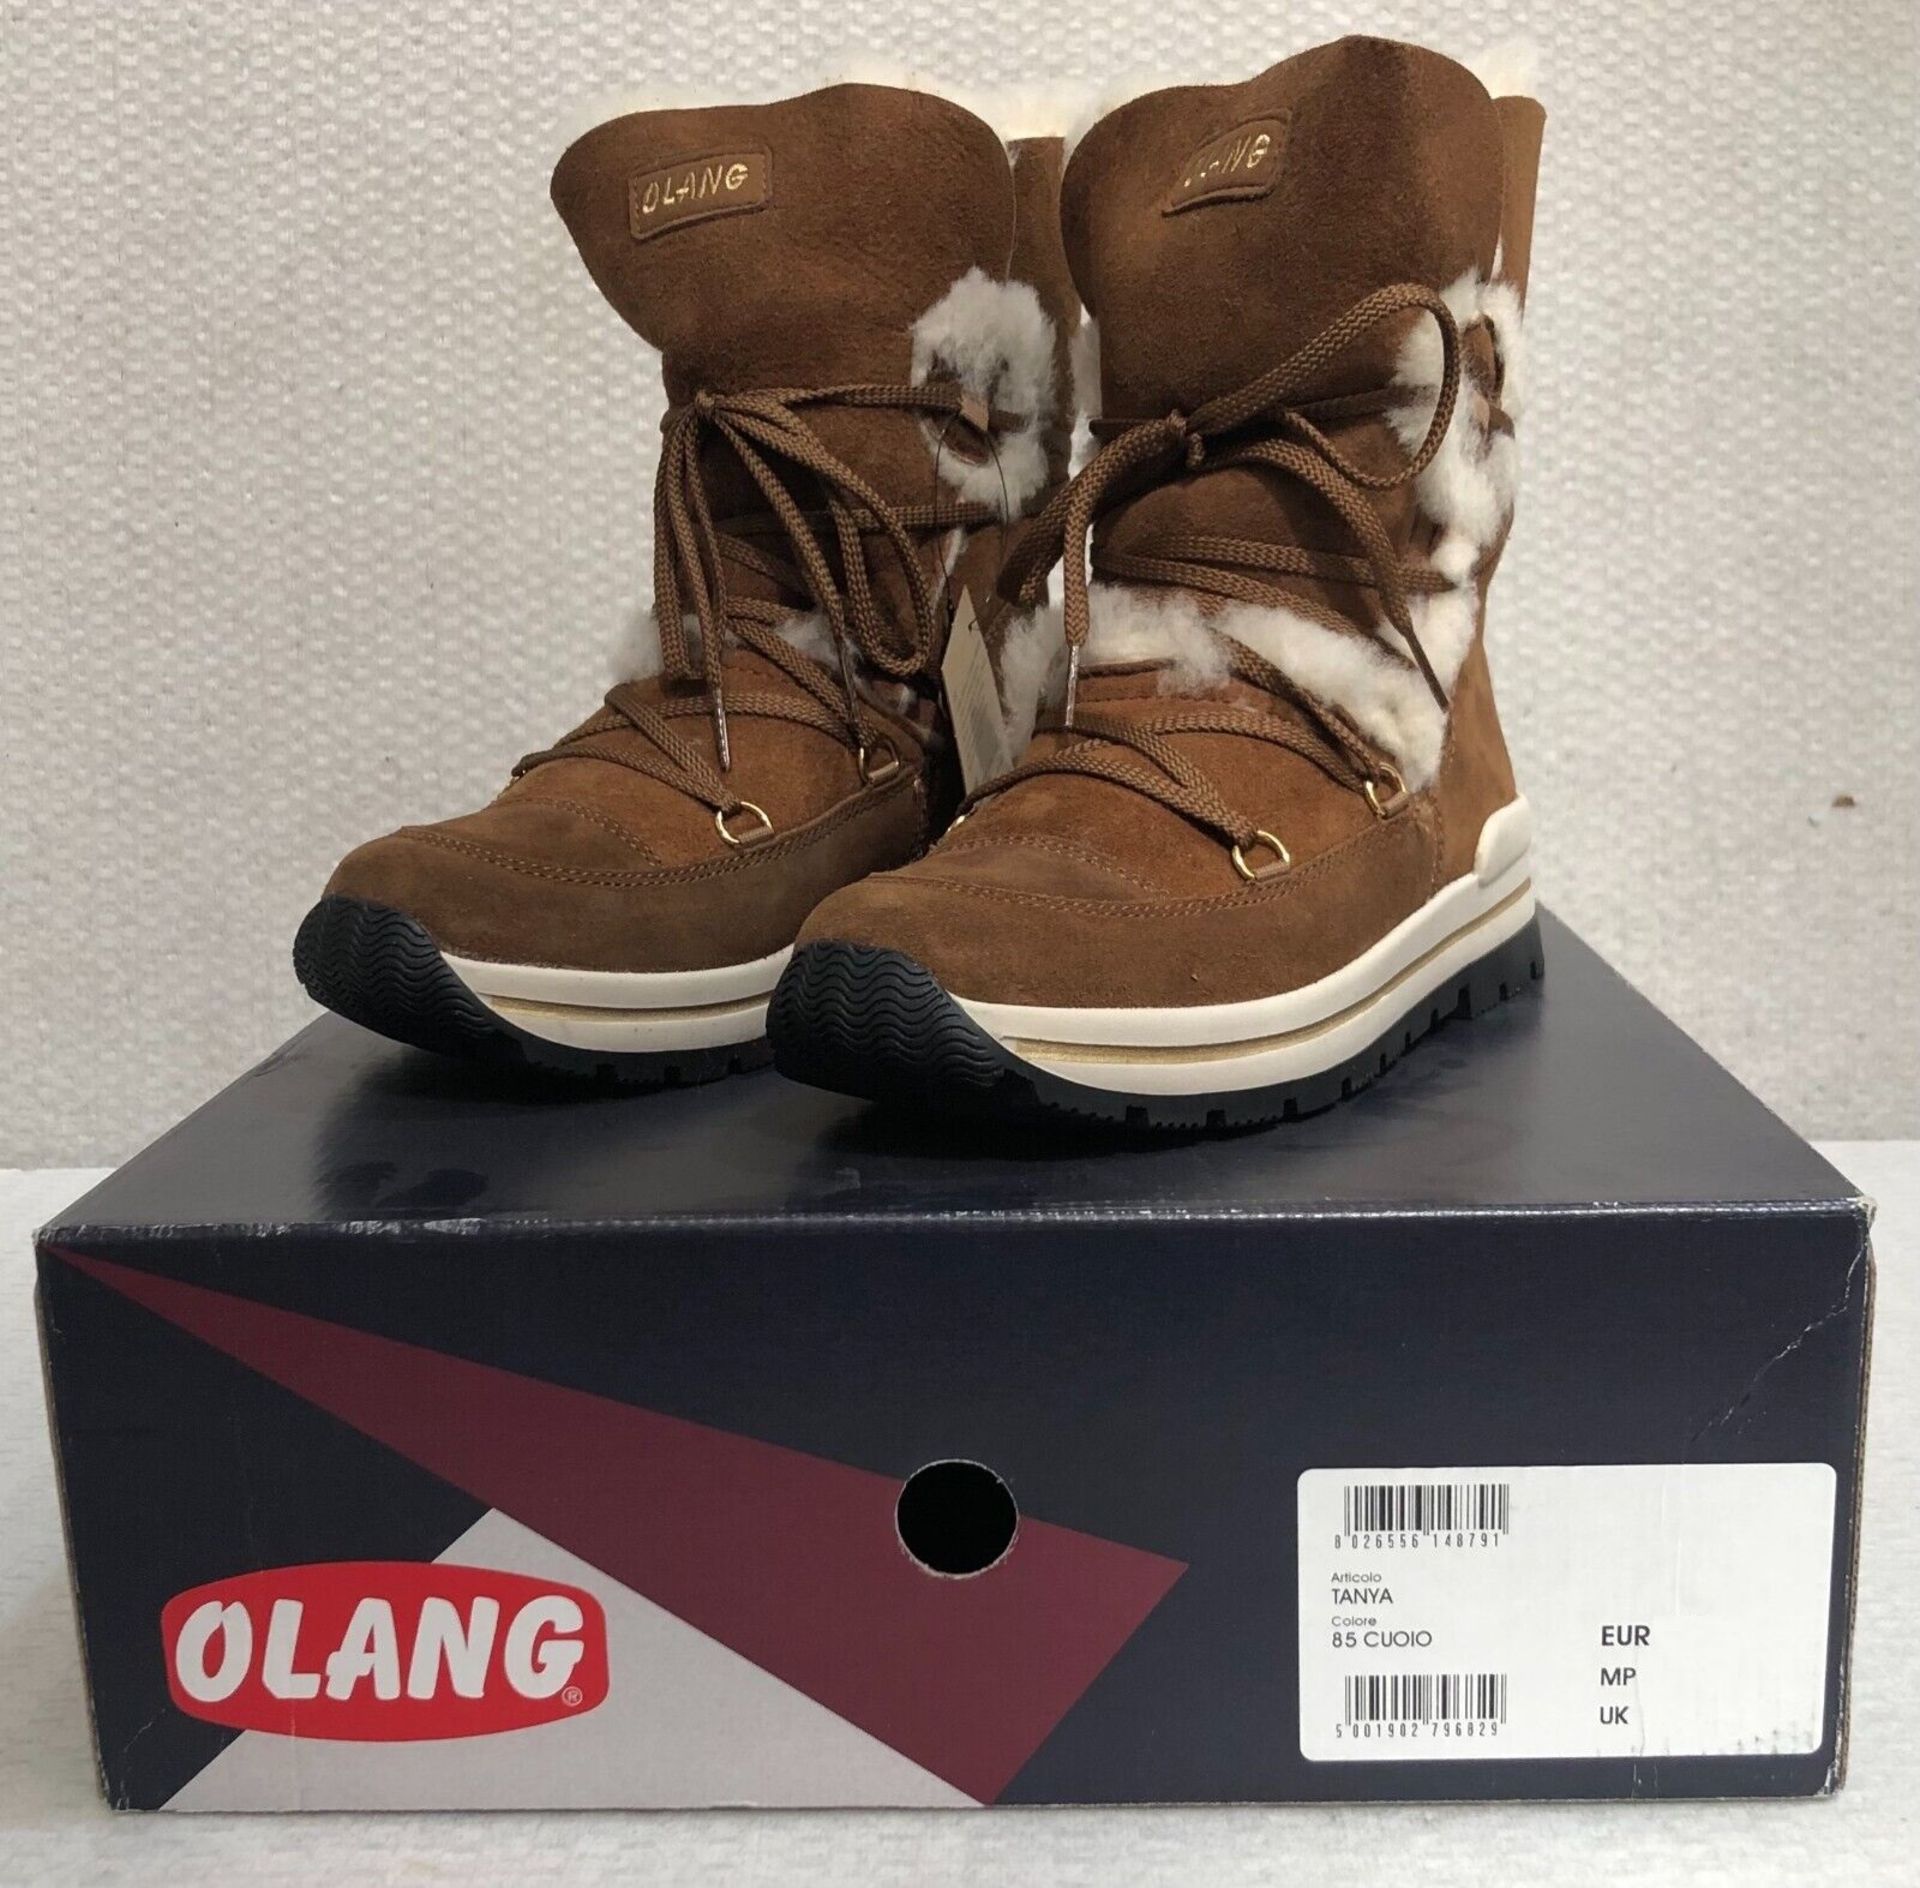 1 x Pair of Designer Olang Women's Winter Boots - Tanya 85 Cuoio - Euro Size 40 - New Boxed - Image 3 of 3